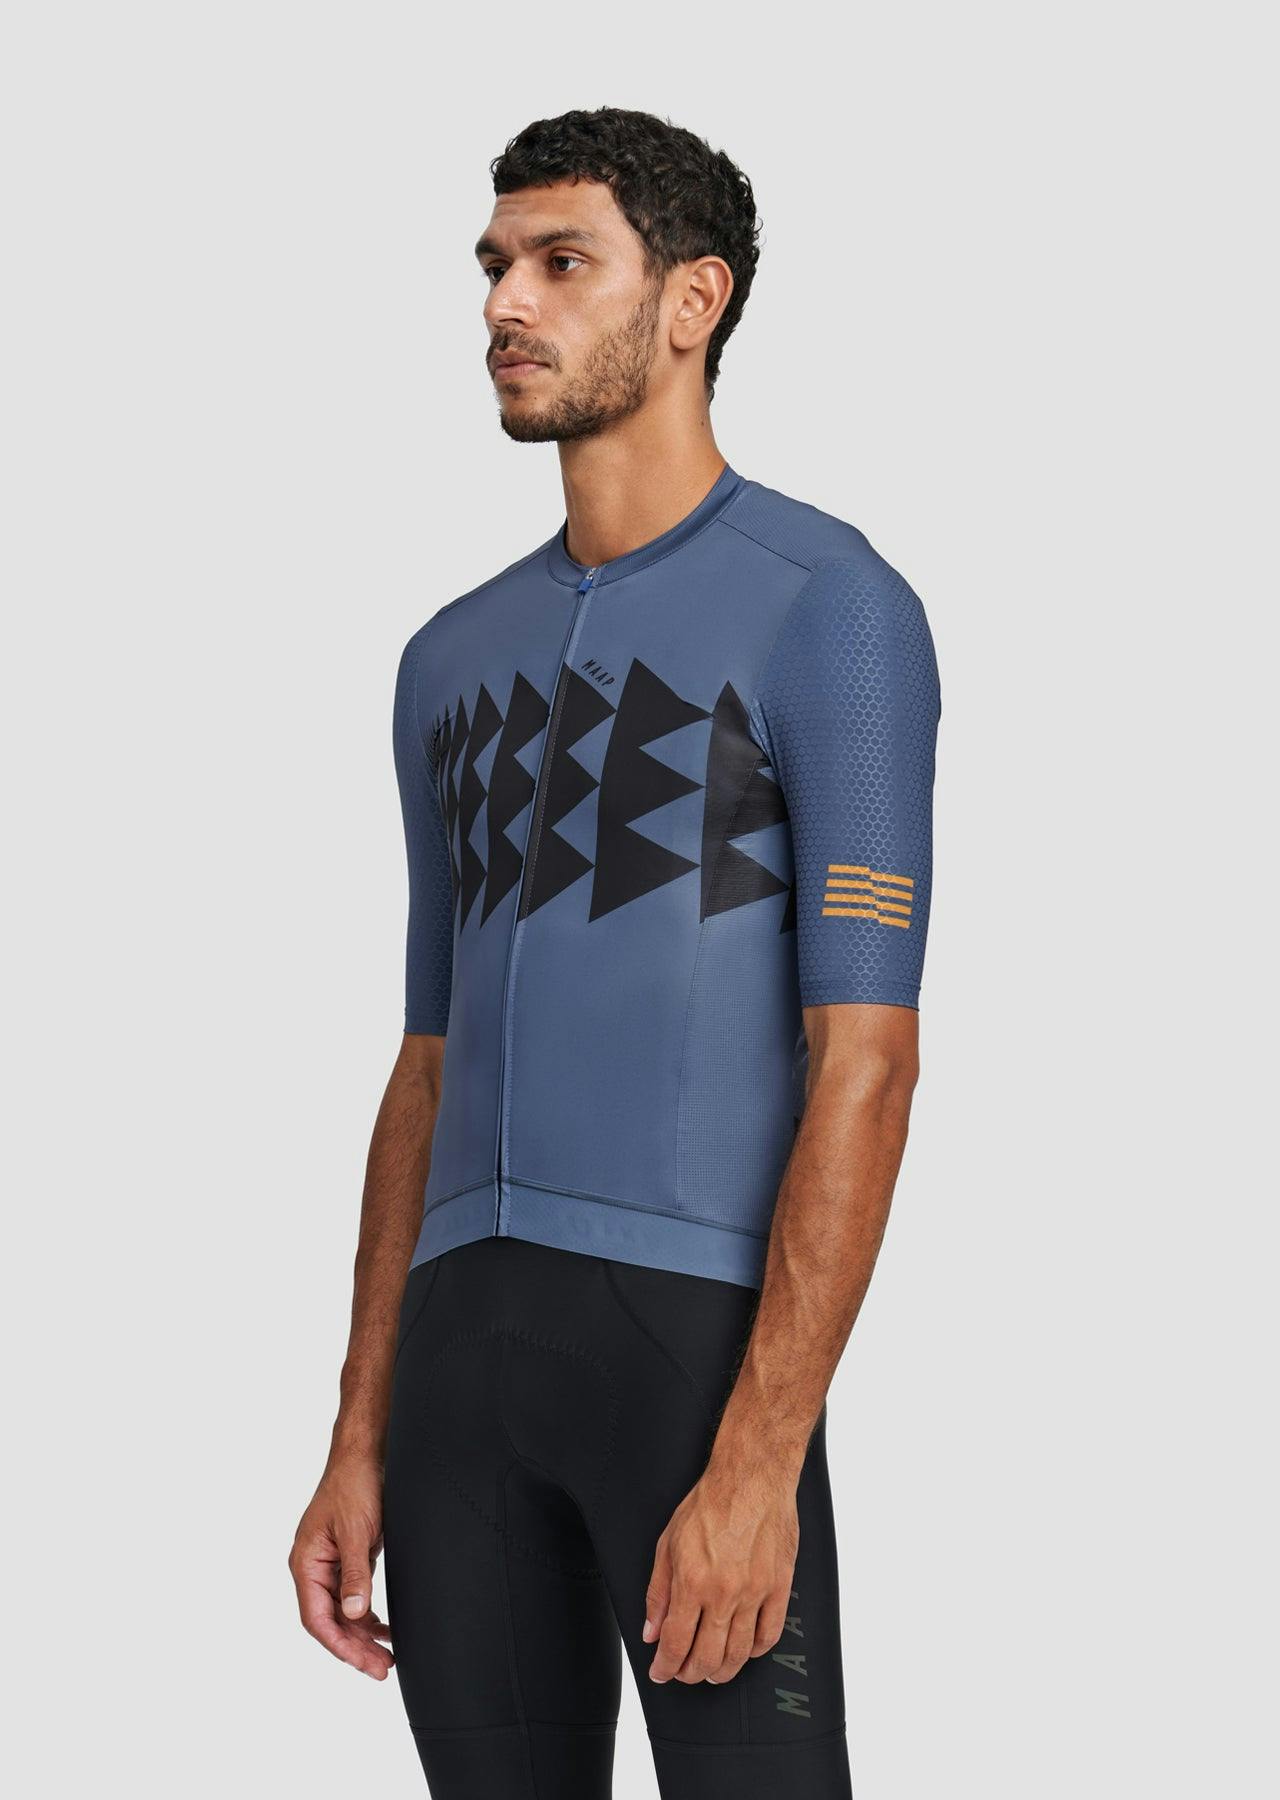 Phase Pro Hex Jersey